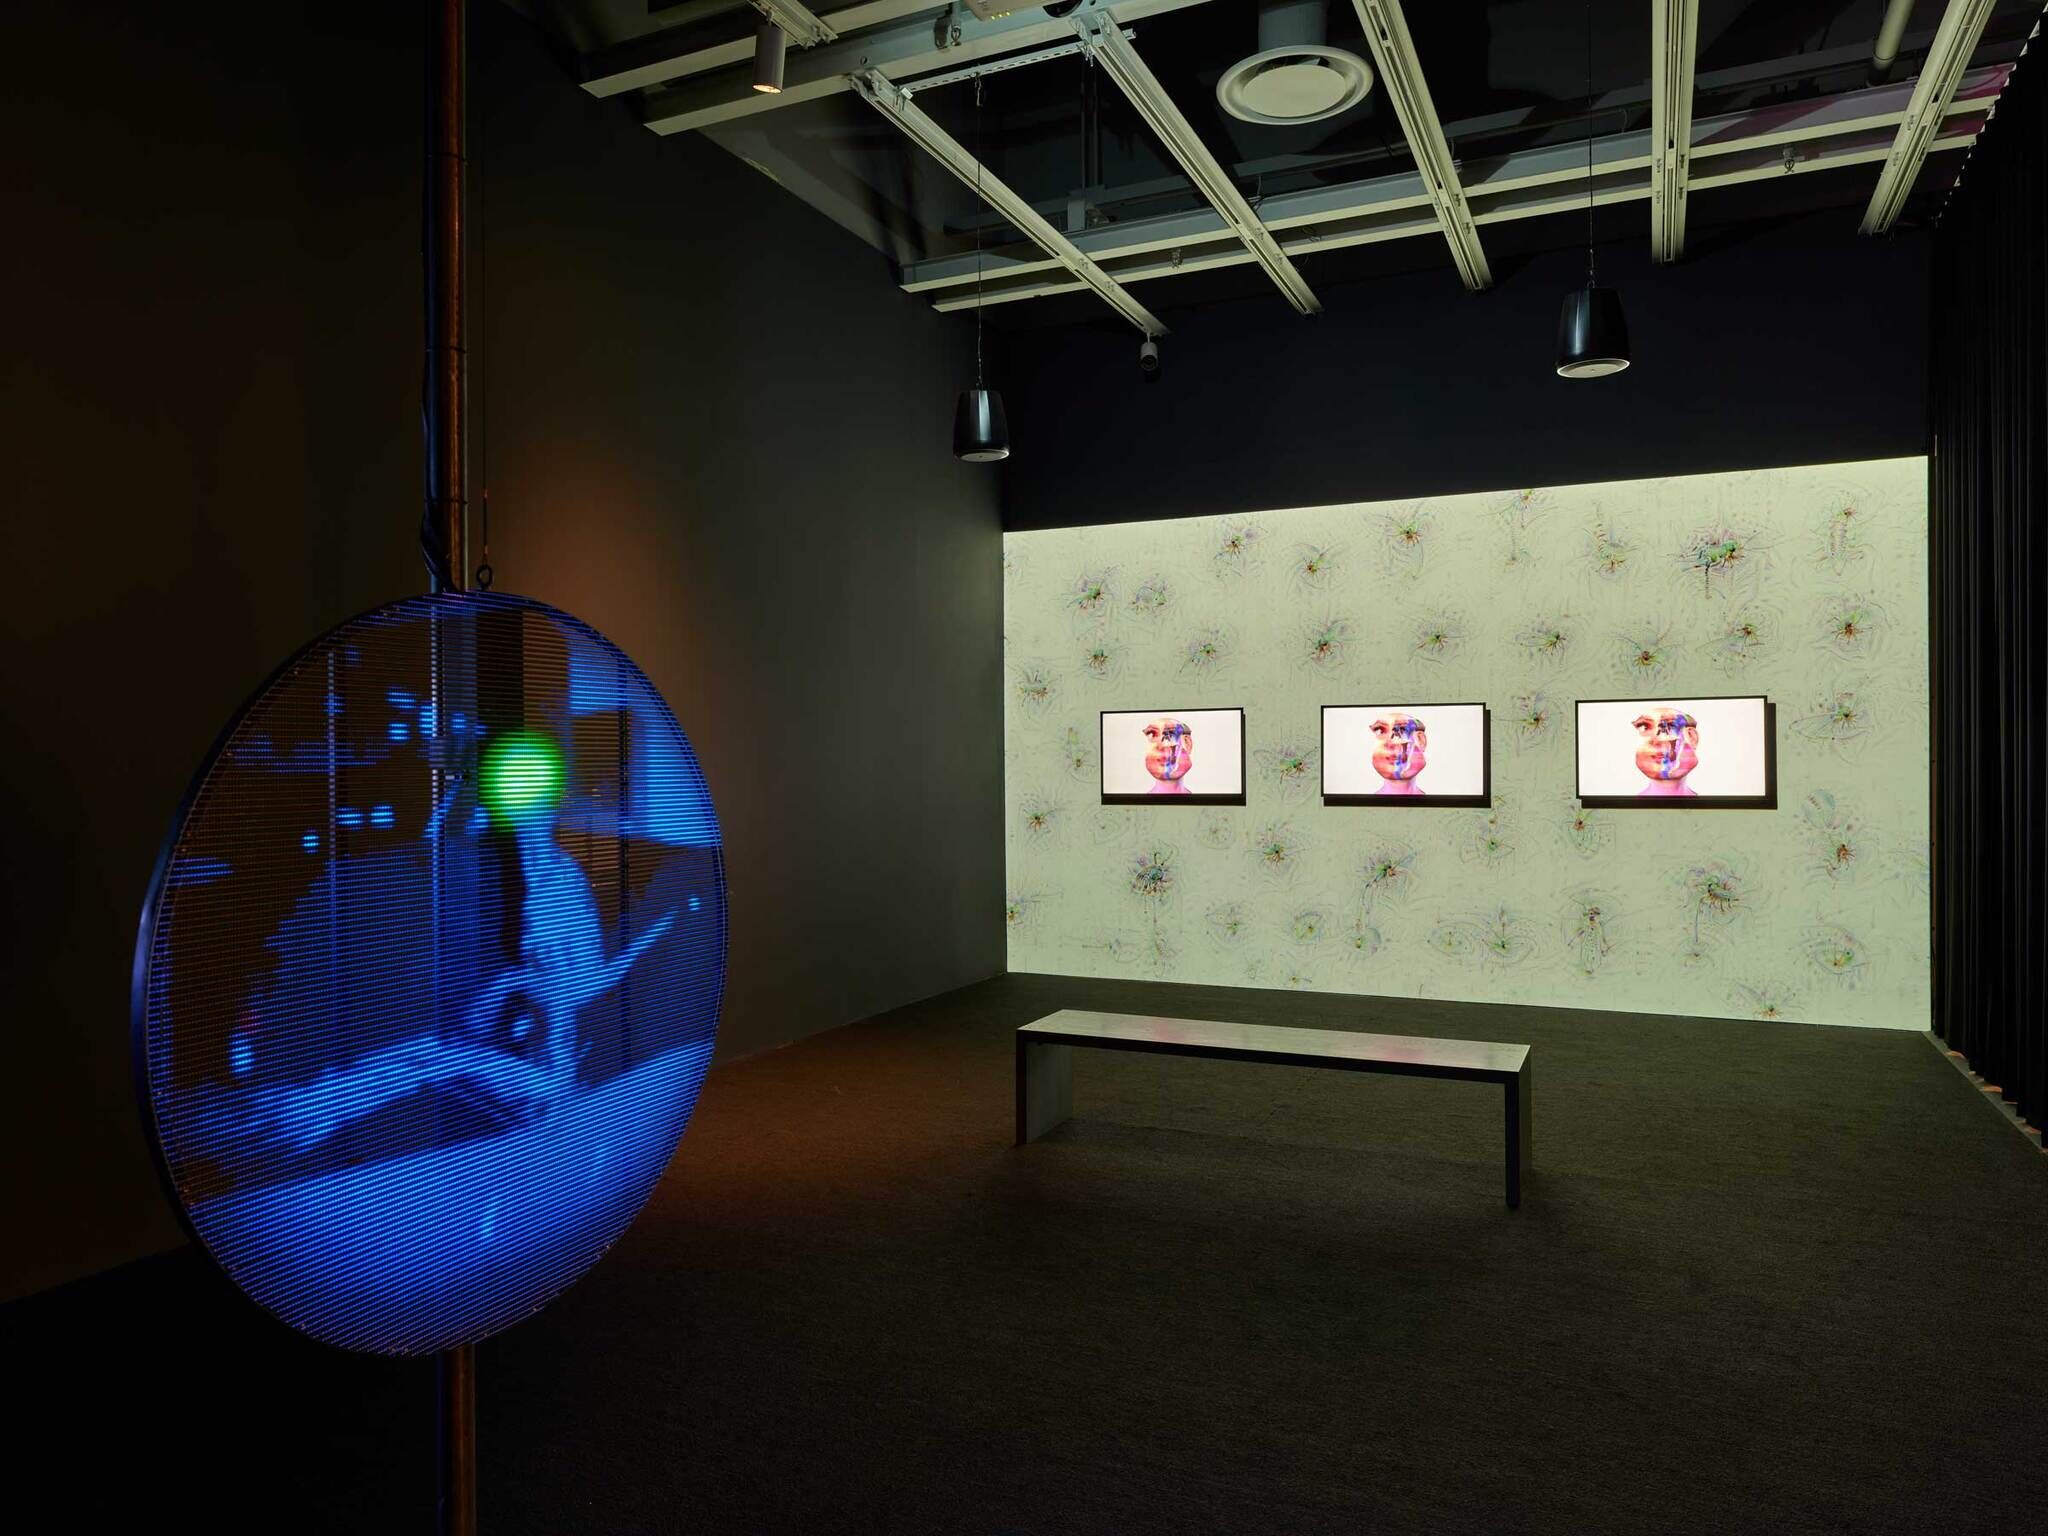 A blue glowing circle in the foreground and in the background the big screen with a green digital pattern behind three smaller screens with humanoid faces.